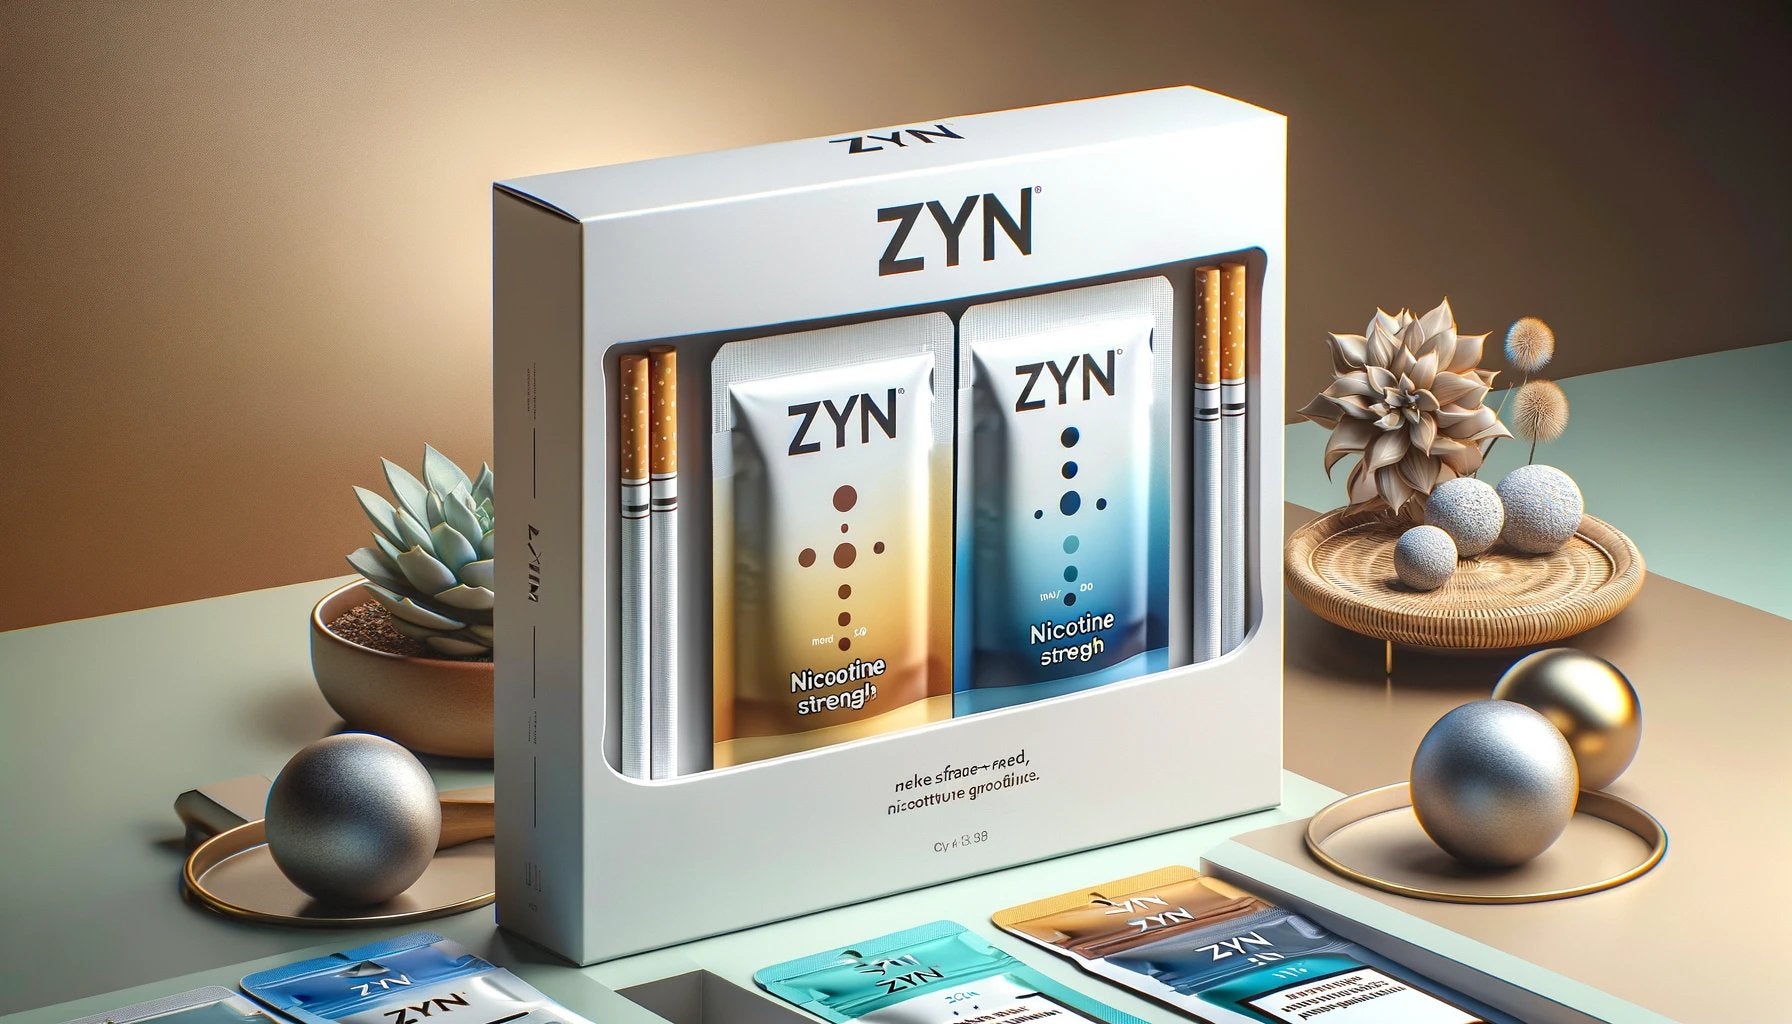 What Are ZYN Nicotine Pouches Made Of?